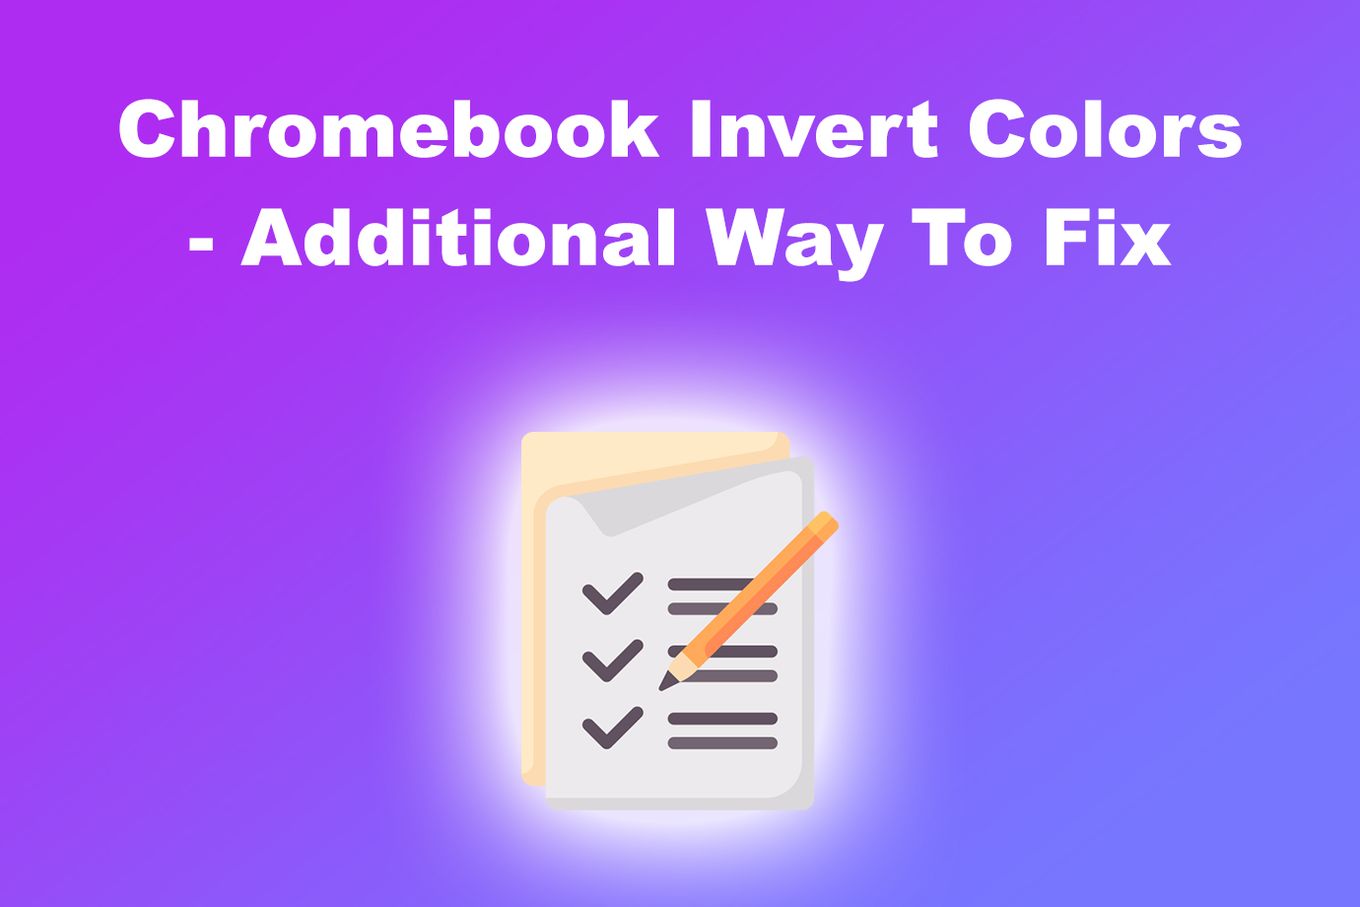 Chromebook Invert Colors - Additional Way To Fix